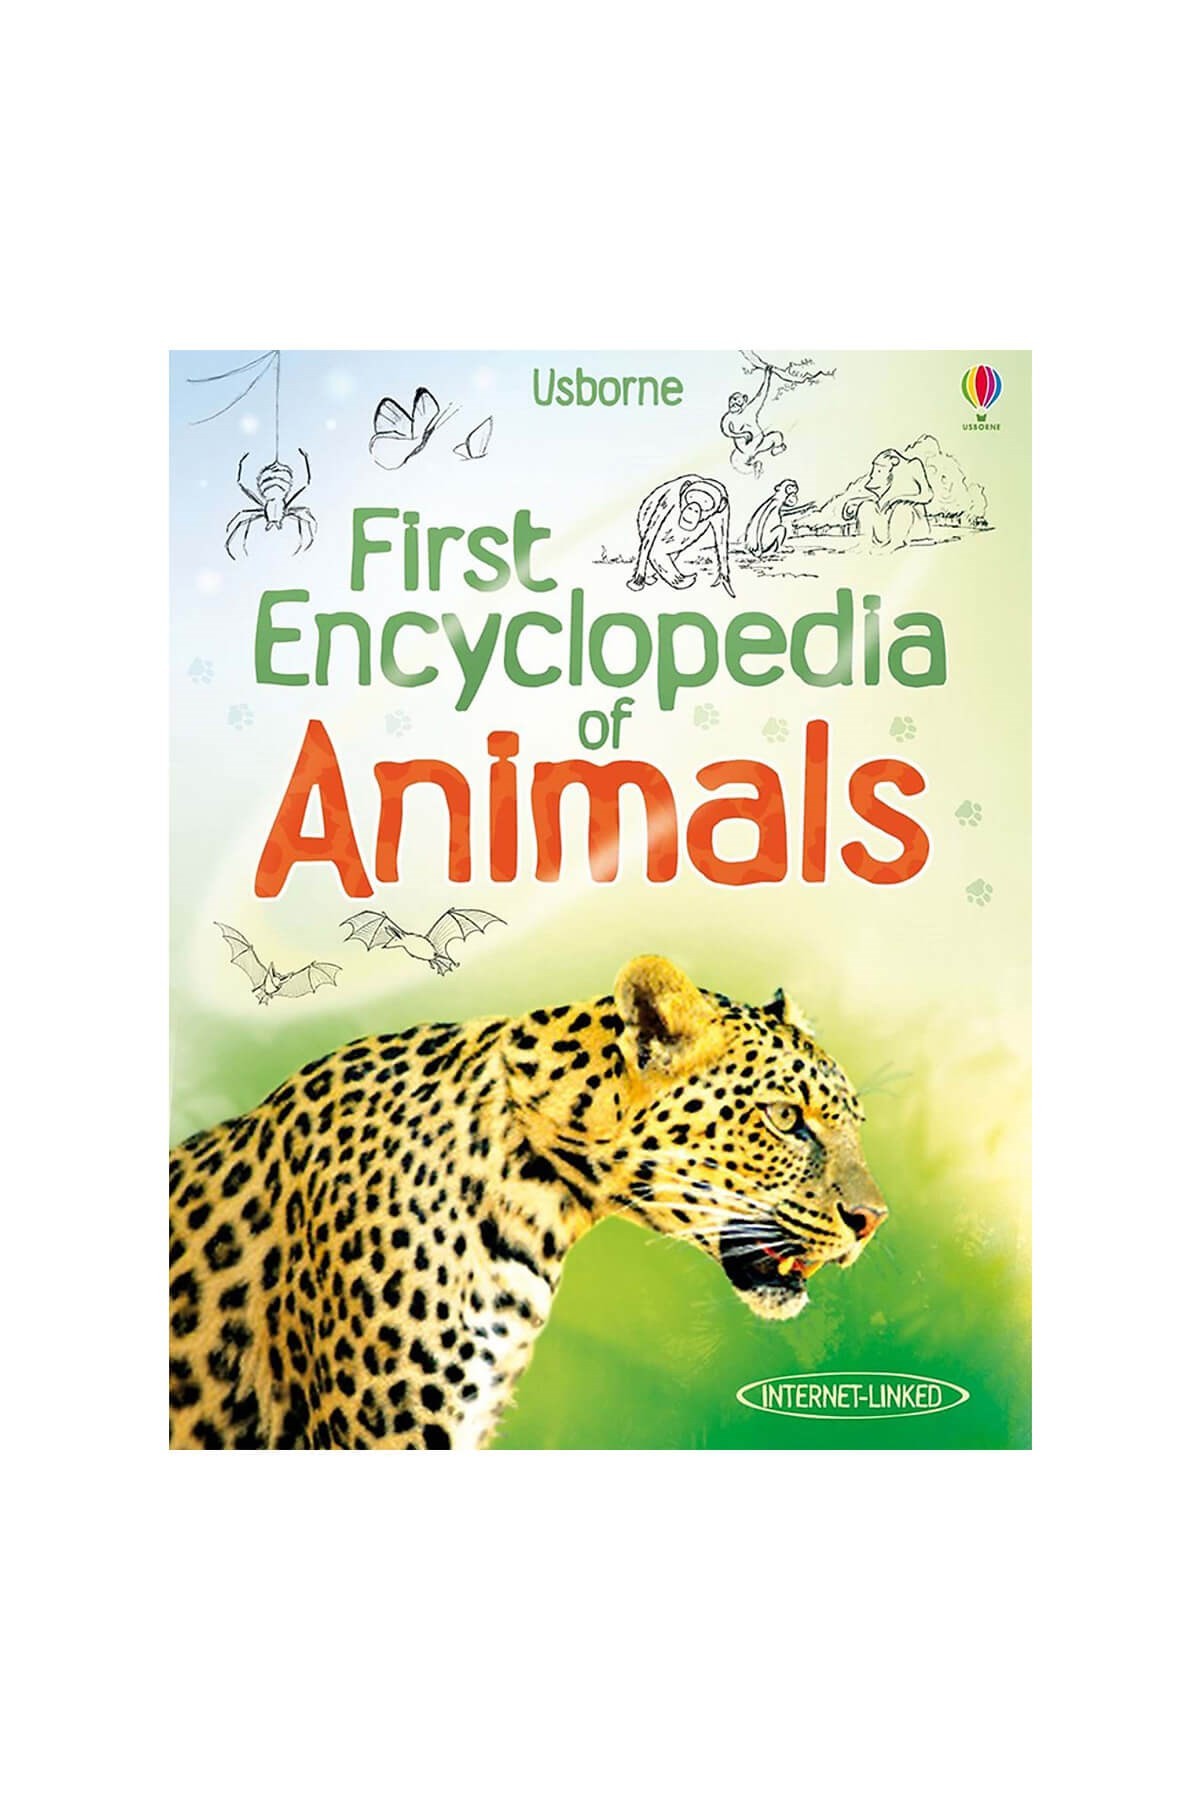 The Usborne First Encylopedia of Animals